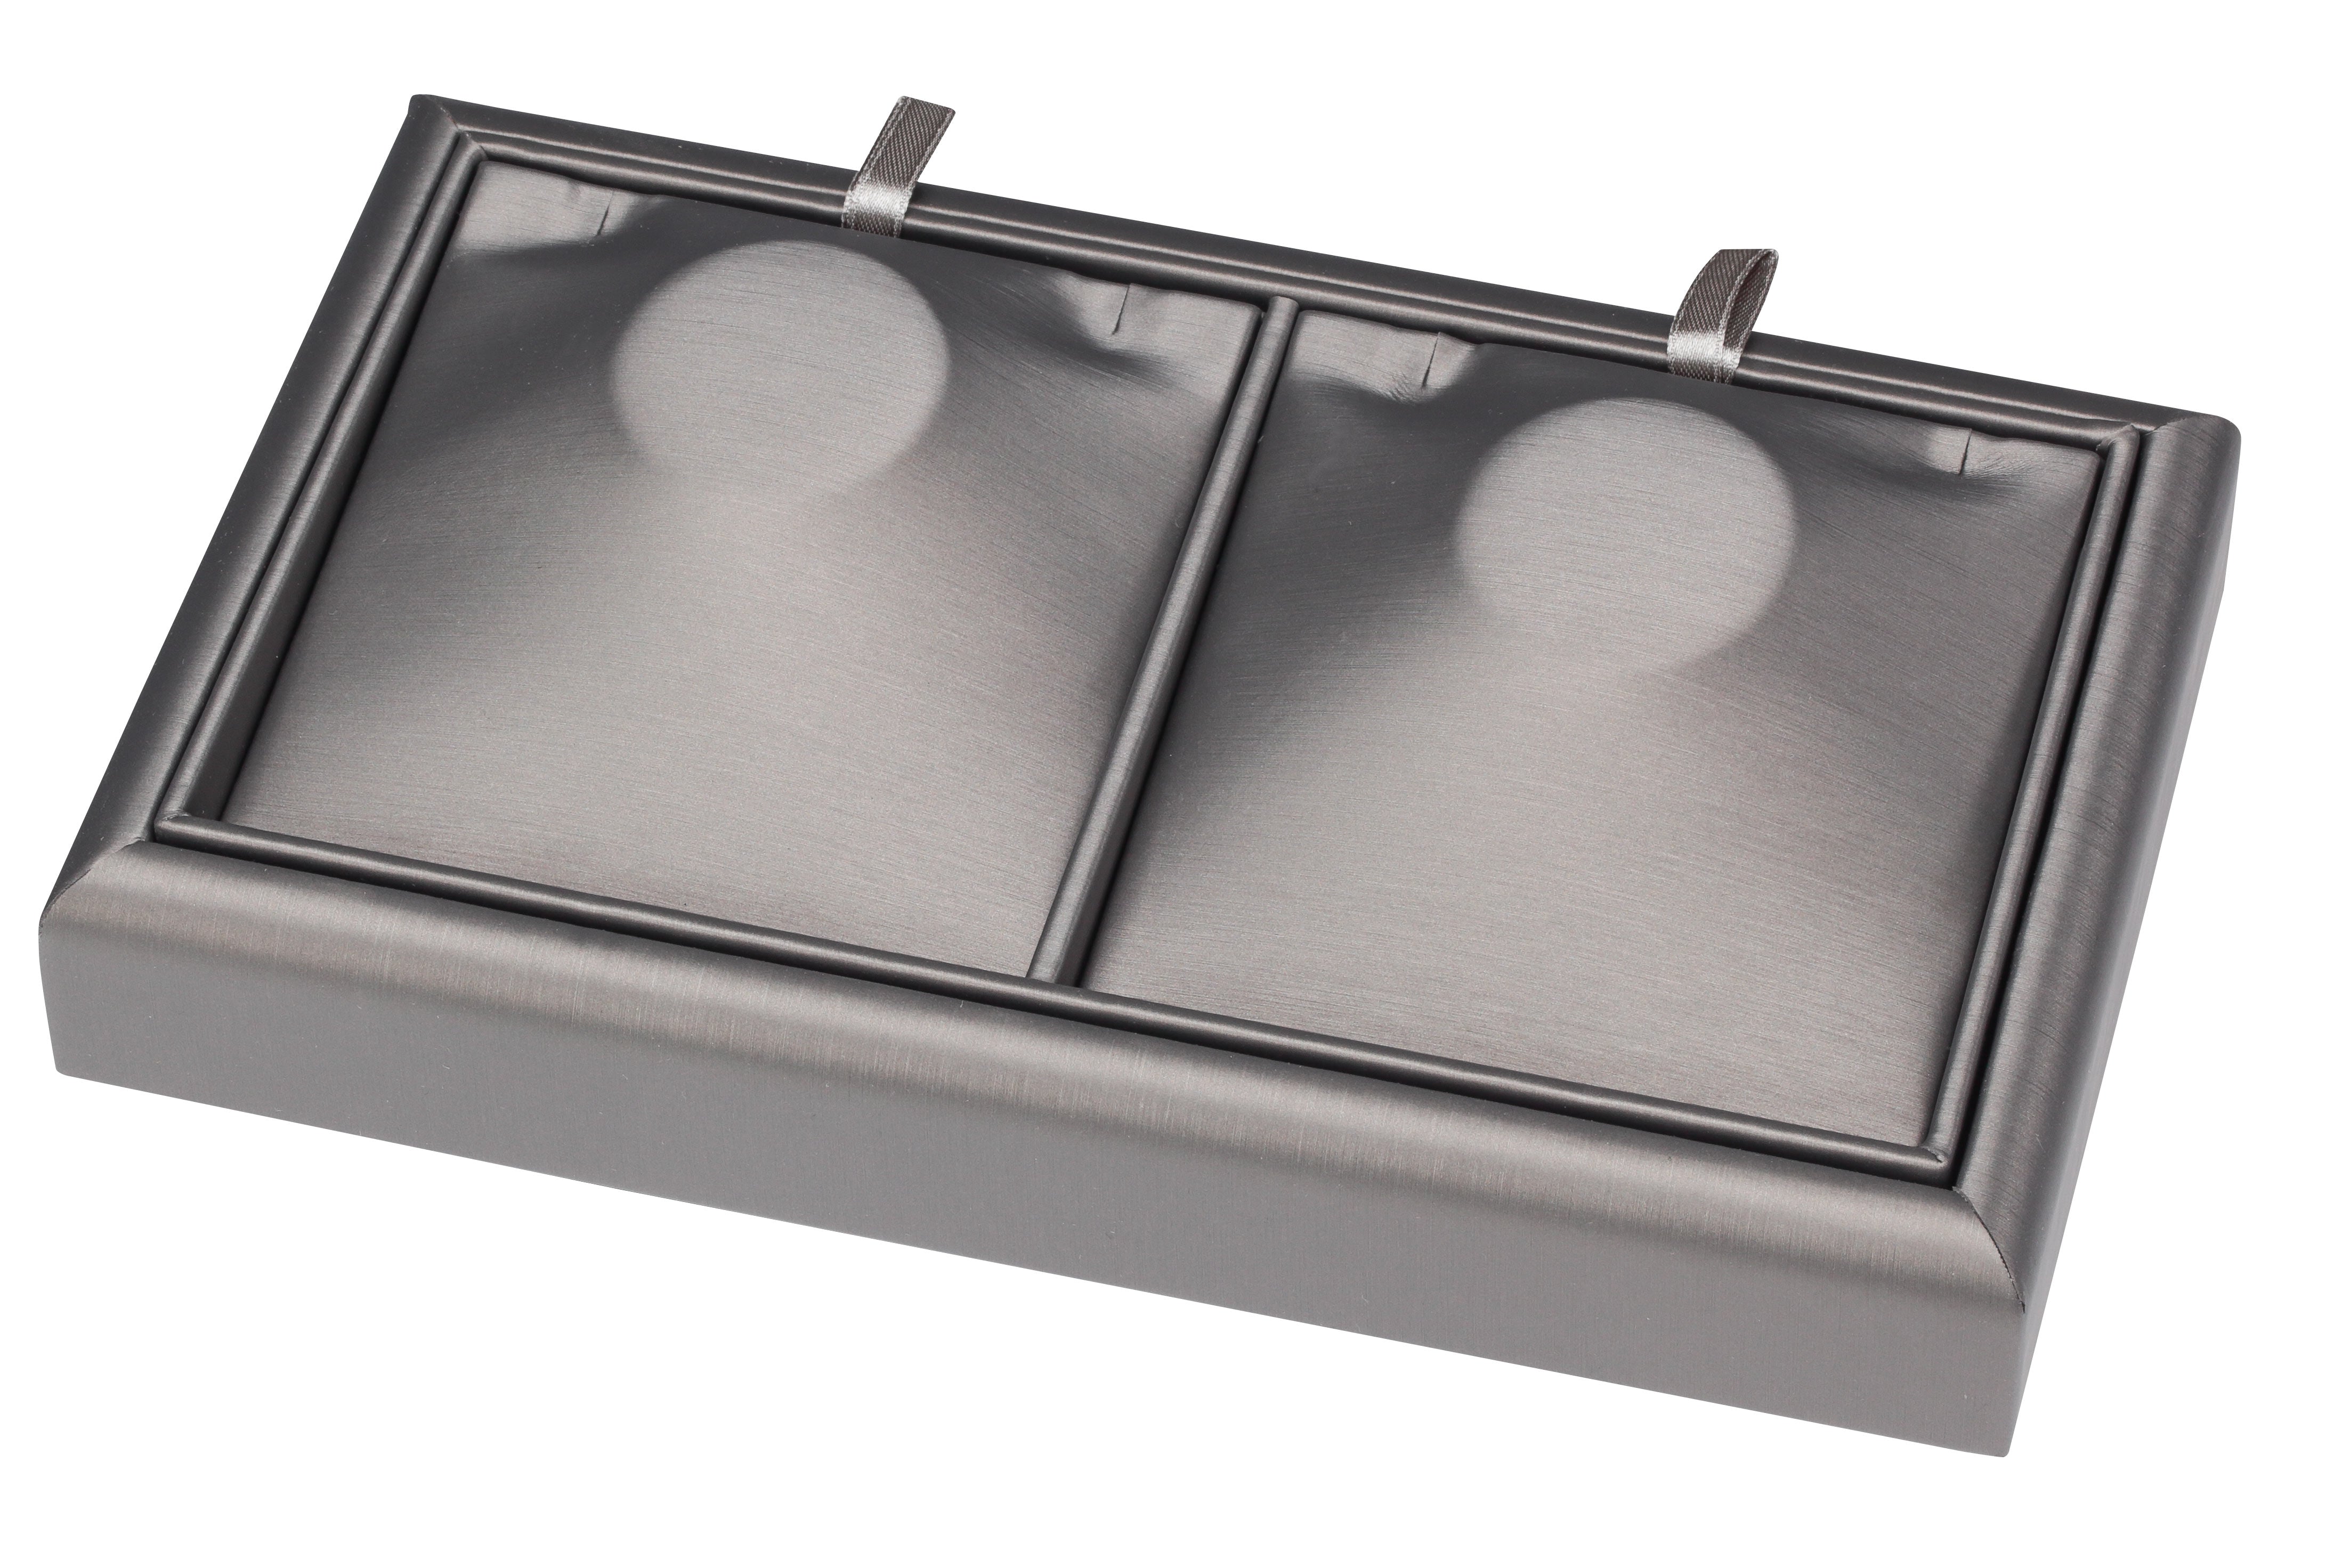 2-Neck Form Stackable Trays, 9" L x 5.5" W